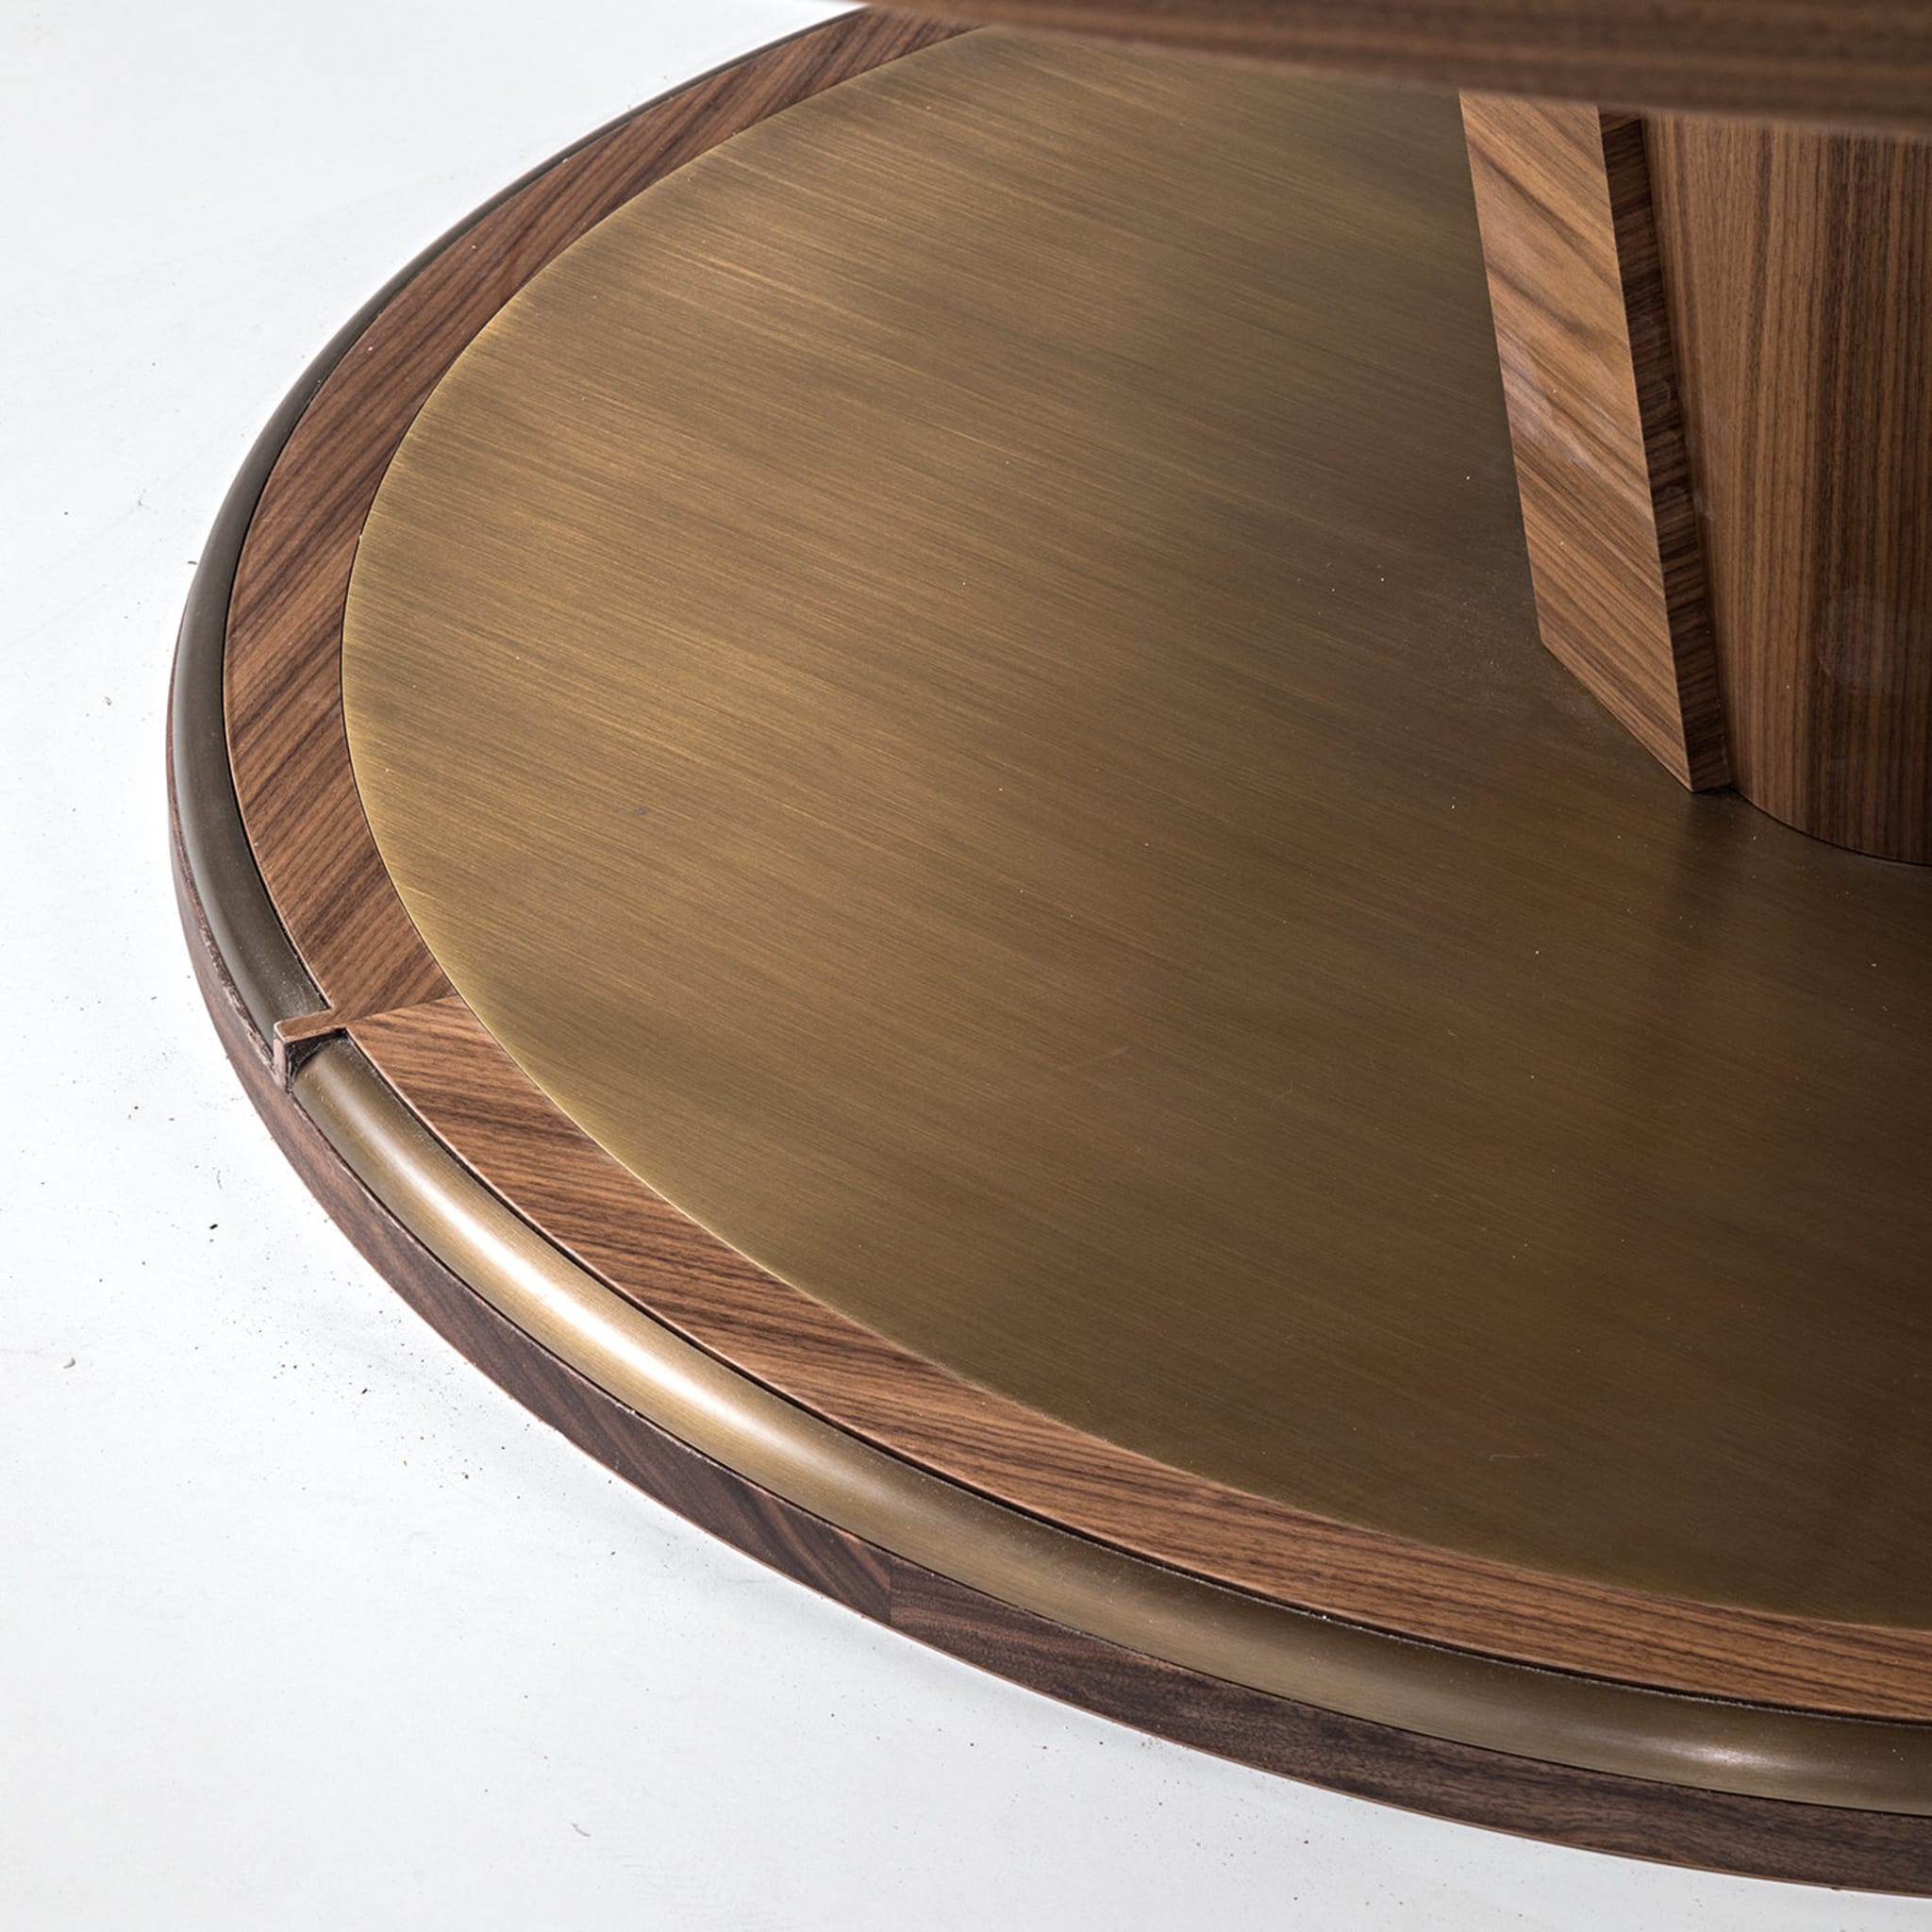 Cesare Dining Table by Simone Ciarmoli and Miguel Queda - Alternative view 2